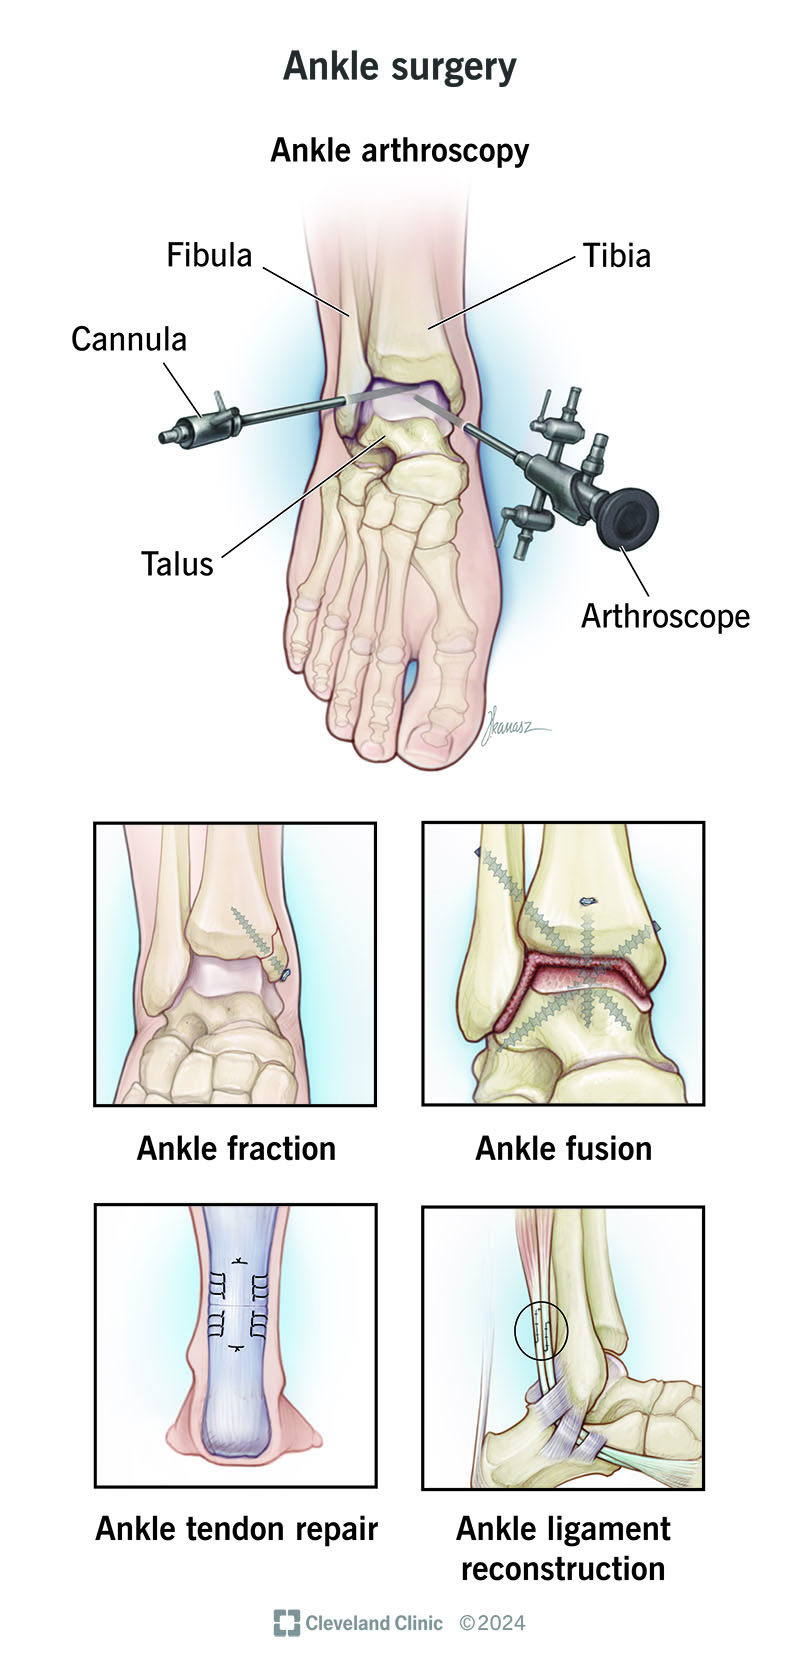 Many common ankle surgery procedures can be performed by minimally invasive arthroscopy.